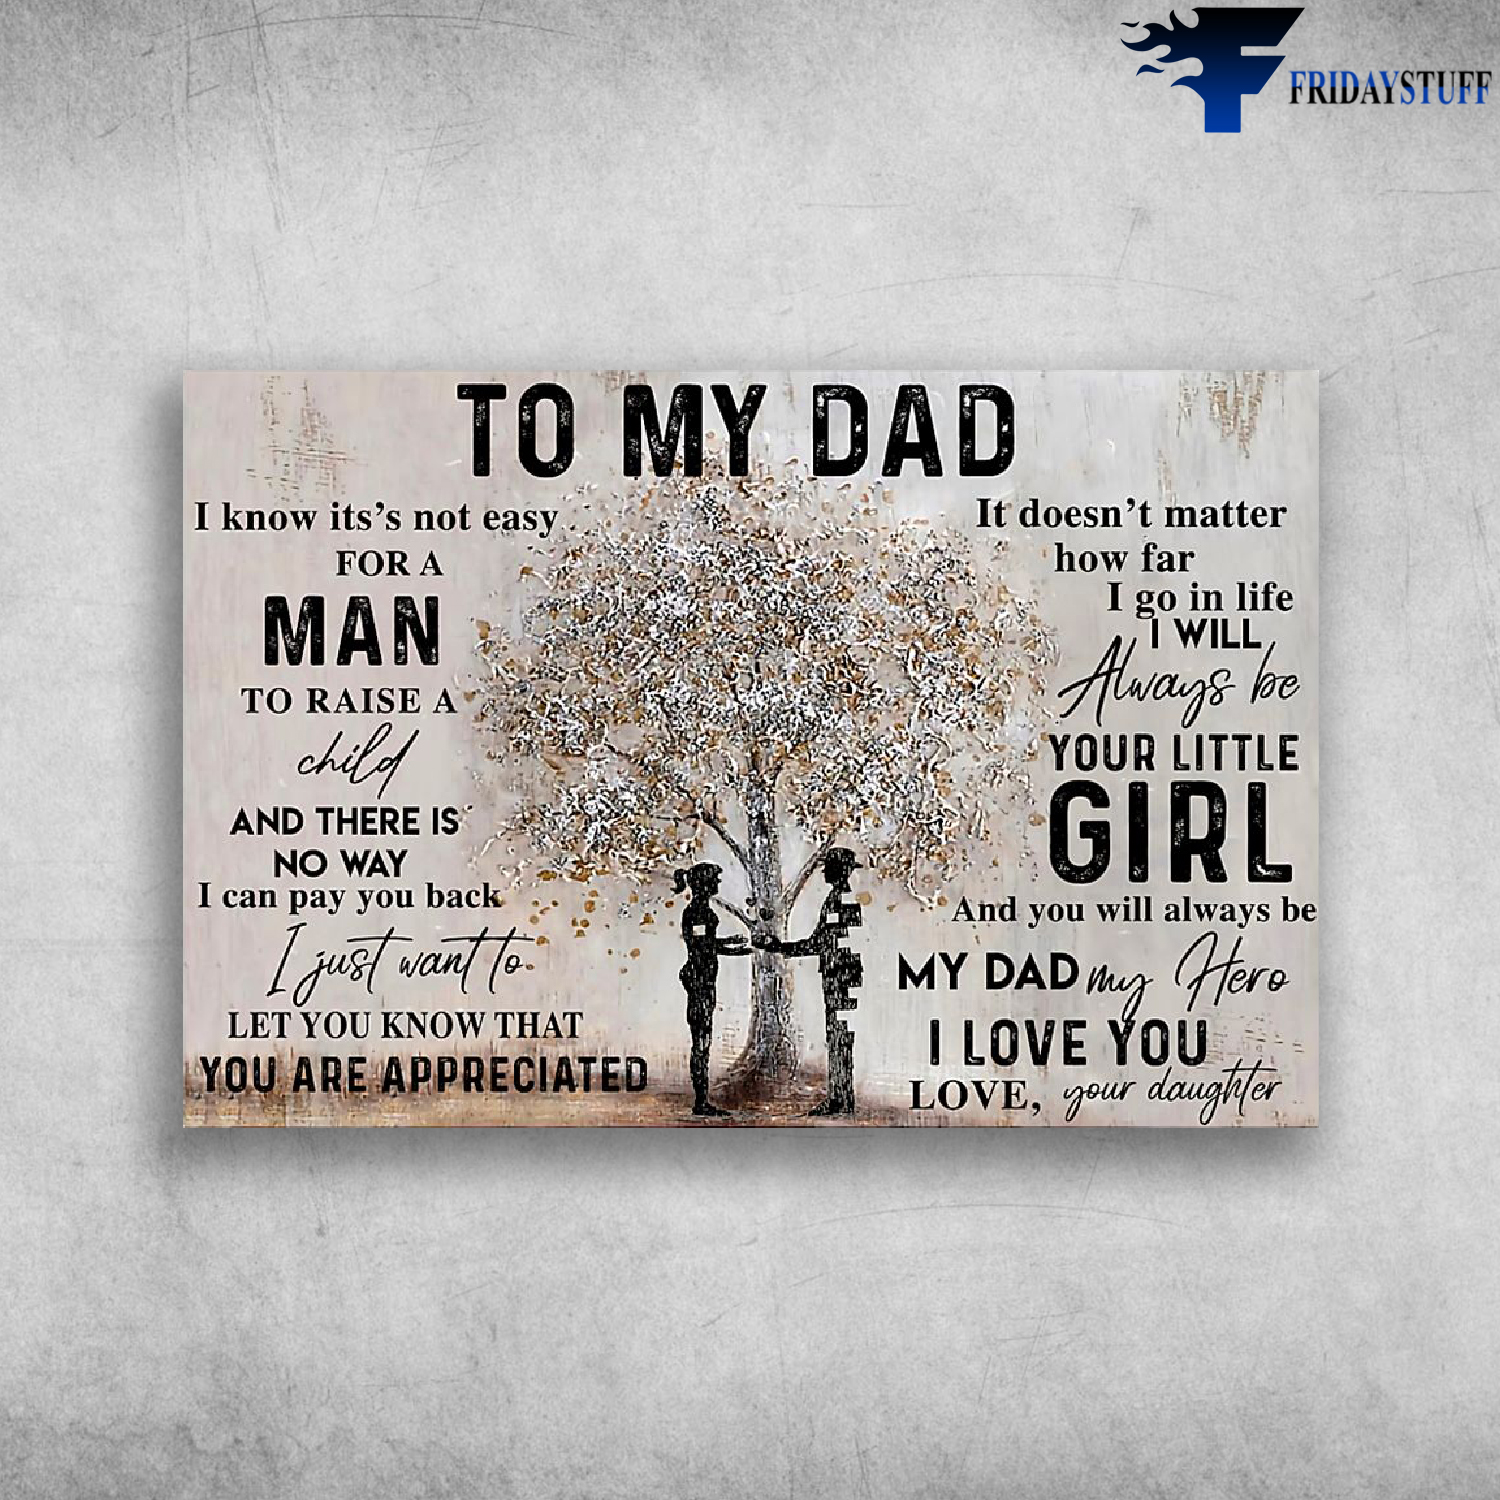 To My Dad I Know It's Not Easy For a Man - I Love You From Your Daughter